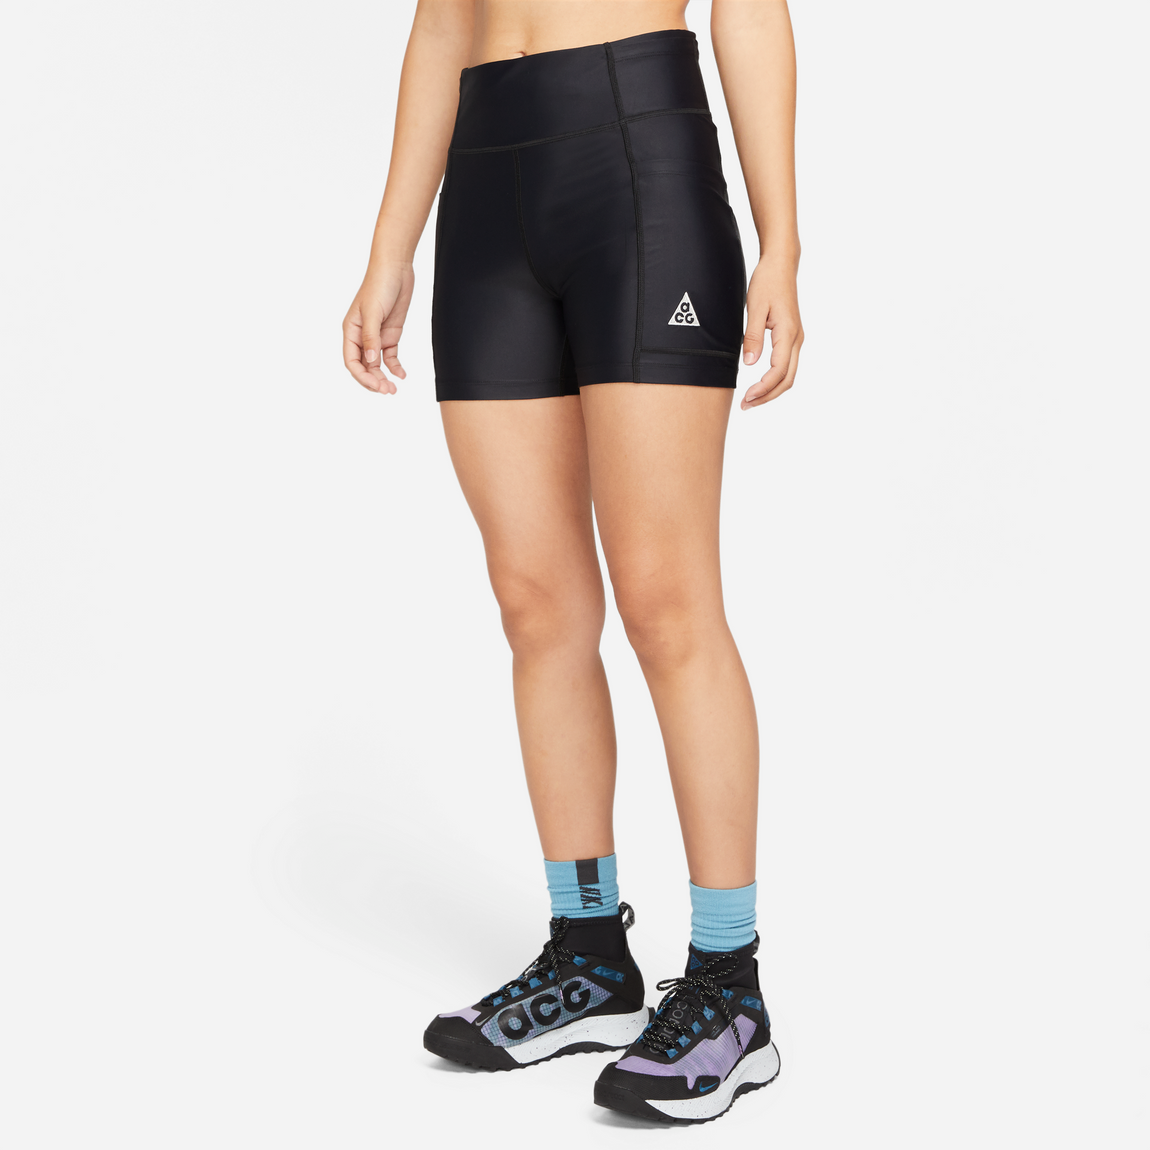 Nike ACG Women's Dri-FIT ADV 'Crater Lookout' Shorts (Black/Summit White) - Nike ACG Women's Dri-FIT ADV 'Crater Lookout' Shorts (Black/Summit White) - 